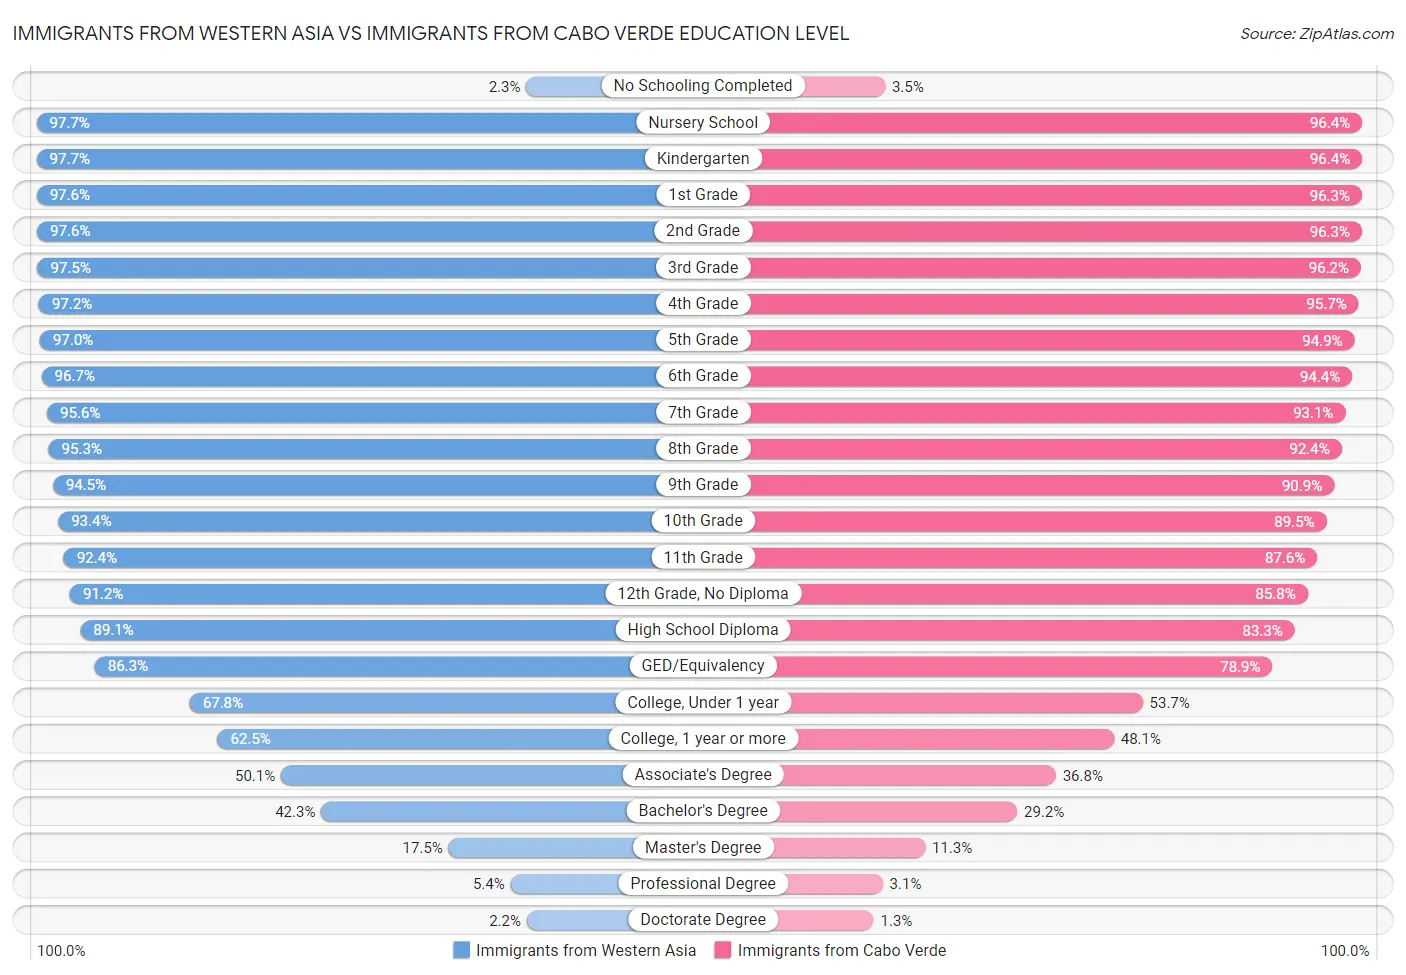 Immigrants from Western Asia vs Immigrants from Cabo Verde Education Level